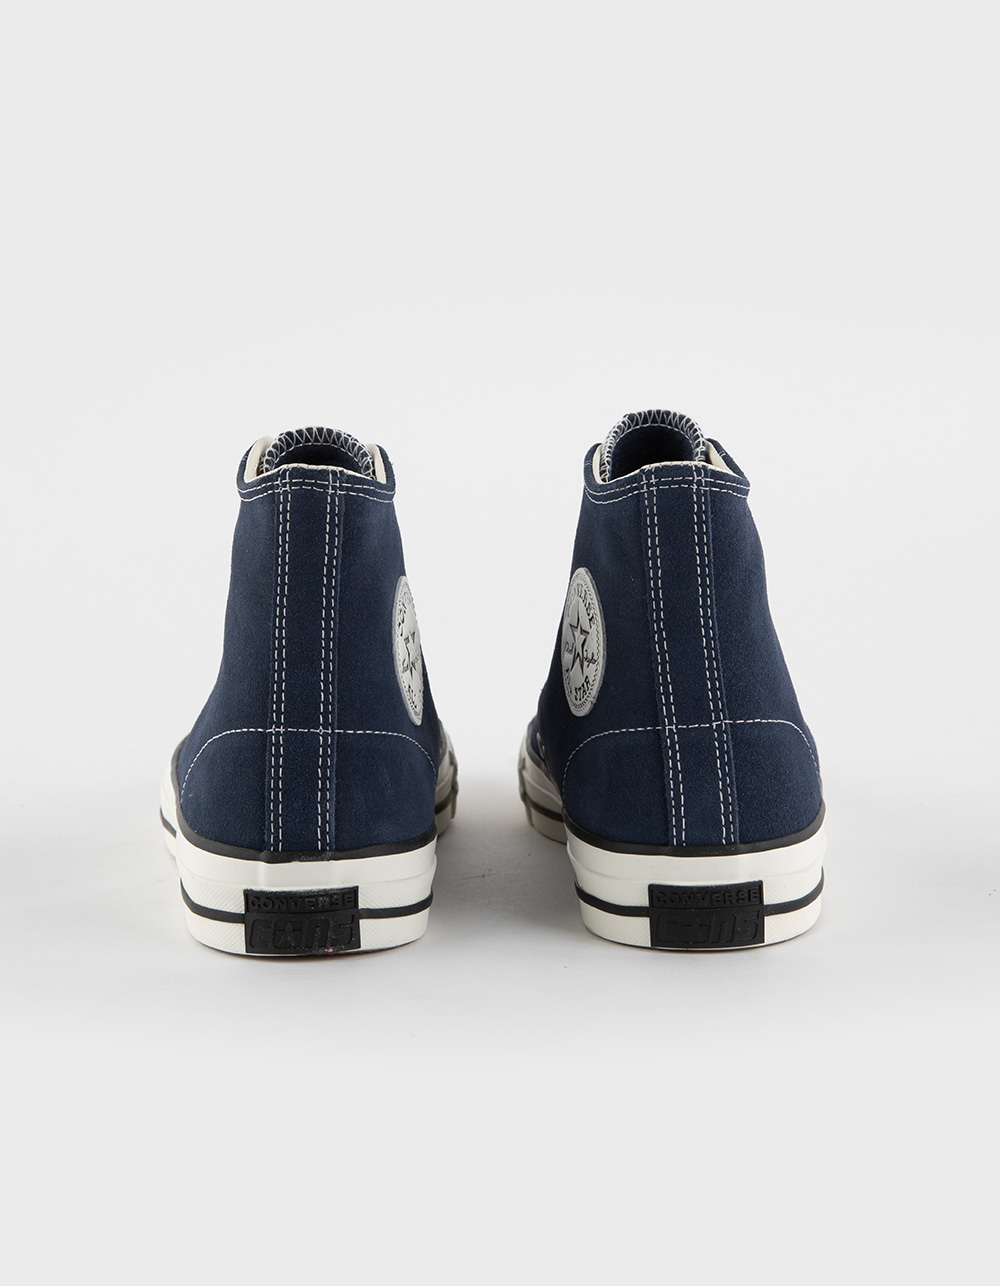 CONVERSE Chuck Taylor All Star Pro Suede High Top Shoes - NAVY | Tillys